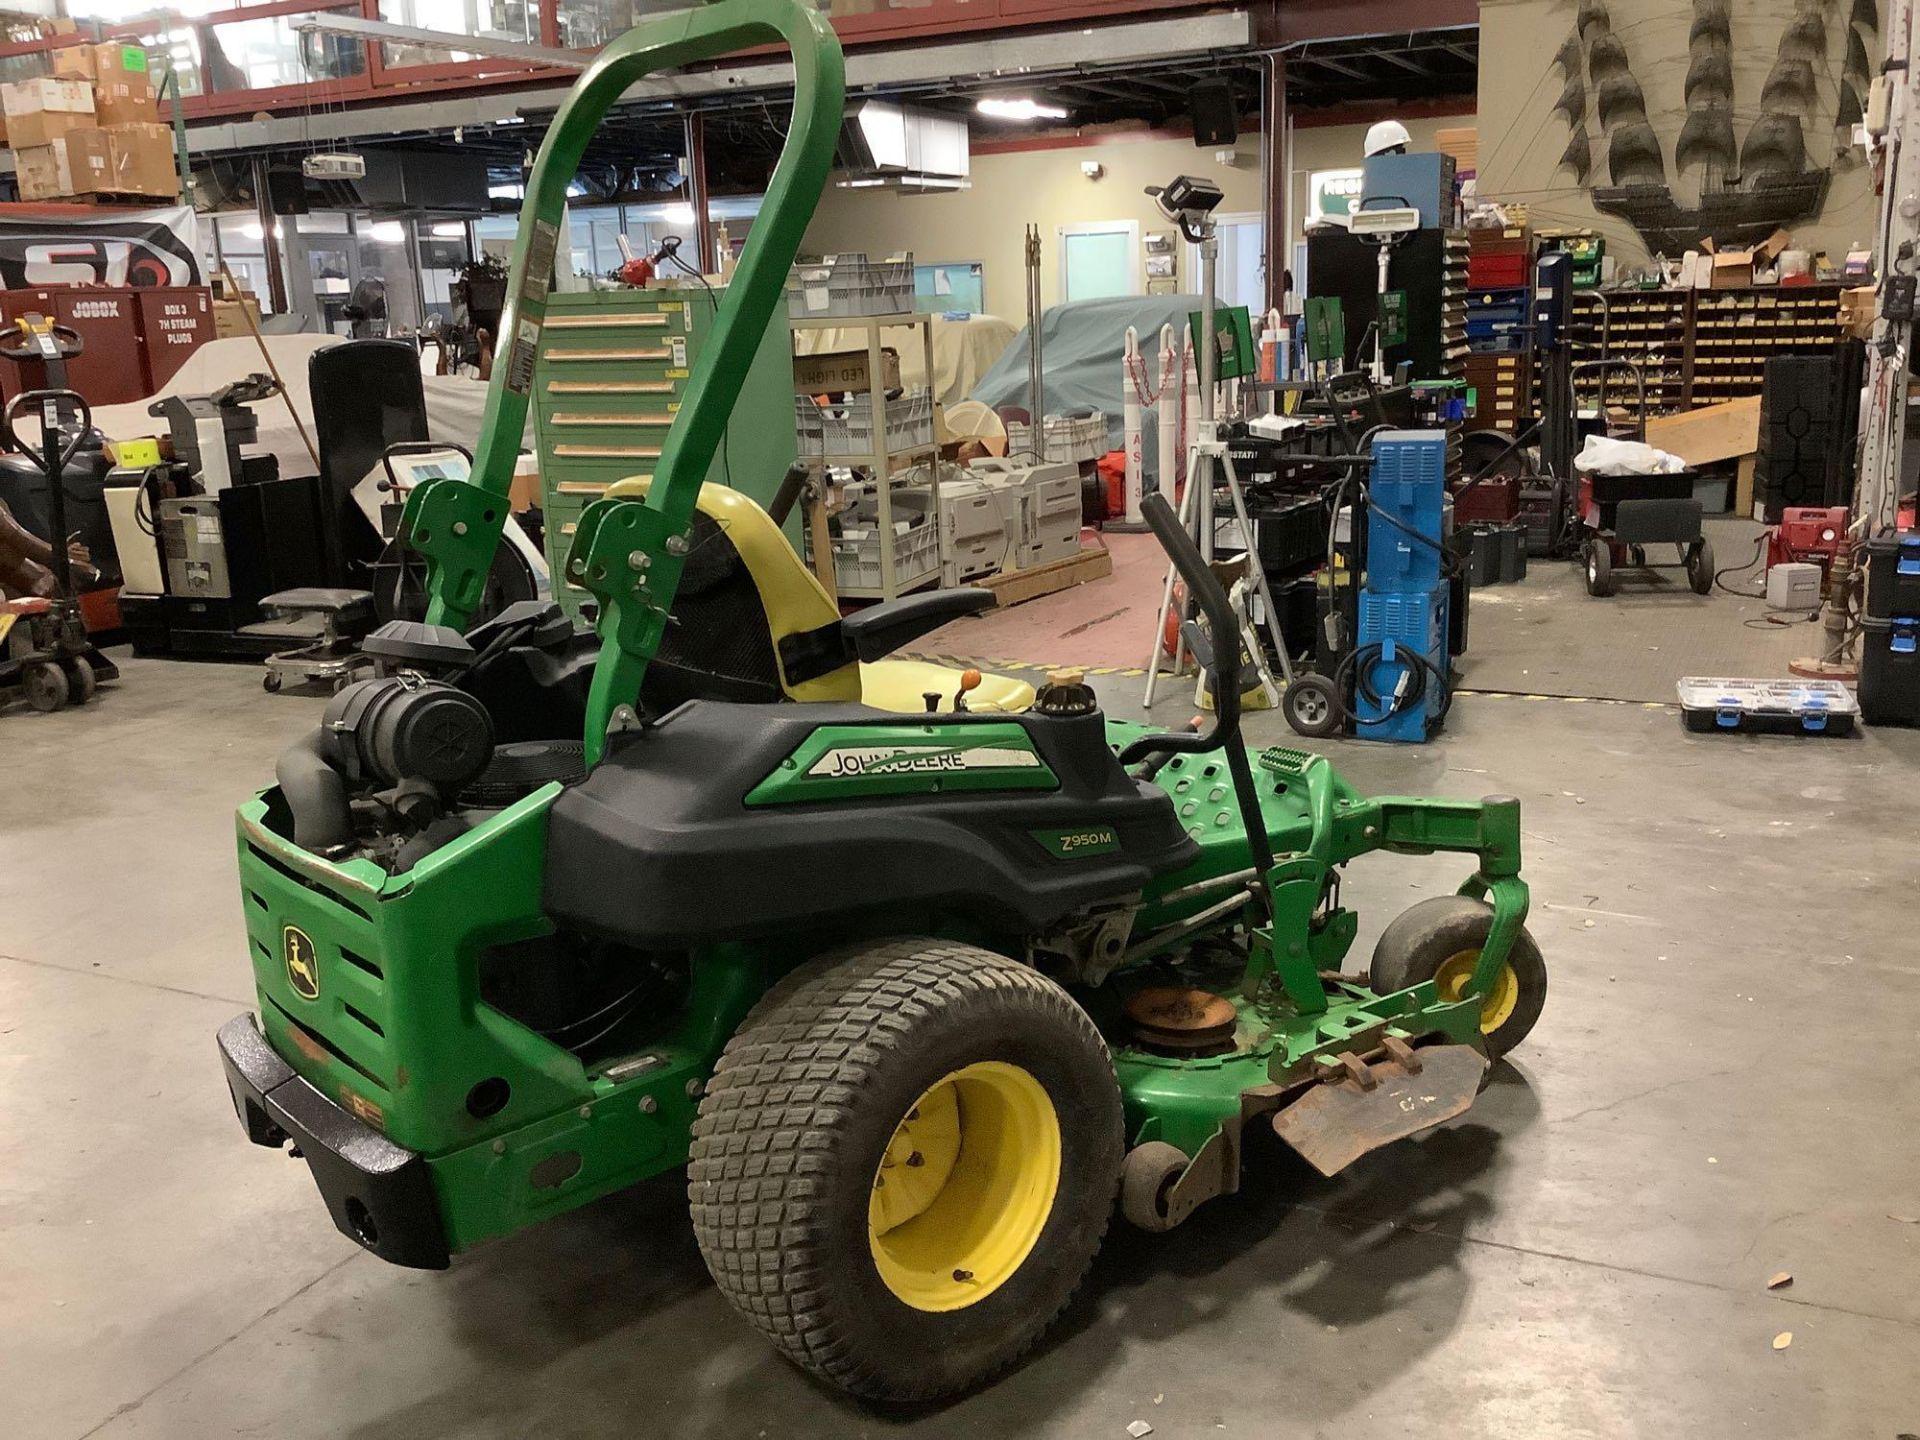 2016 JOHN DEERE COMMERCIAL MOWER MODEL Z950M APPROX 60IN ,GAS POWER, RUNS AND OPERATES - Image 2 of 7